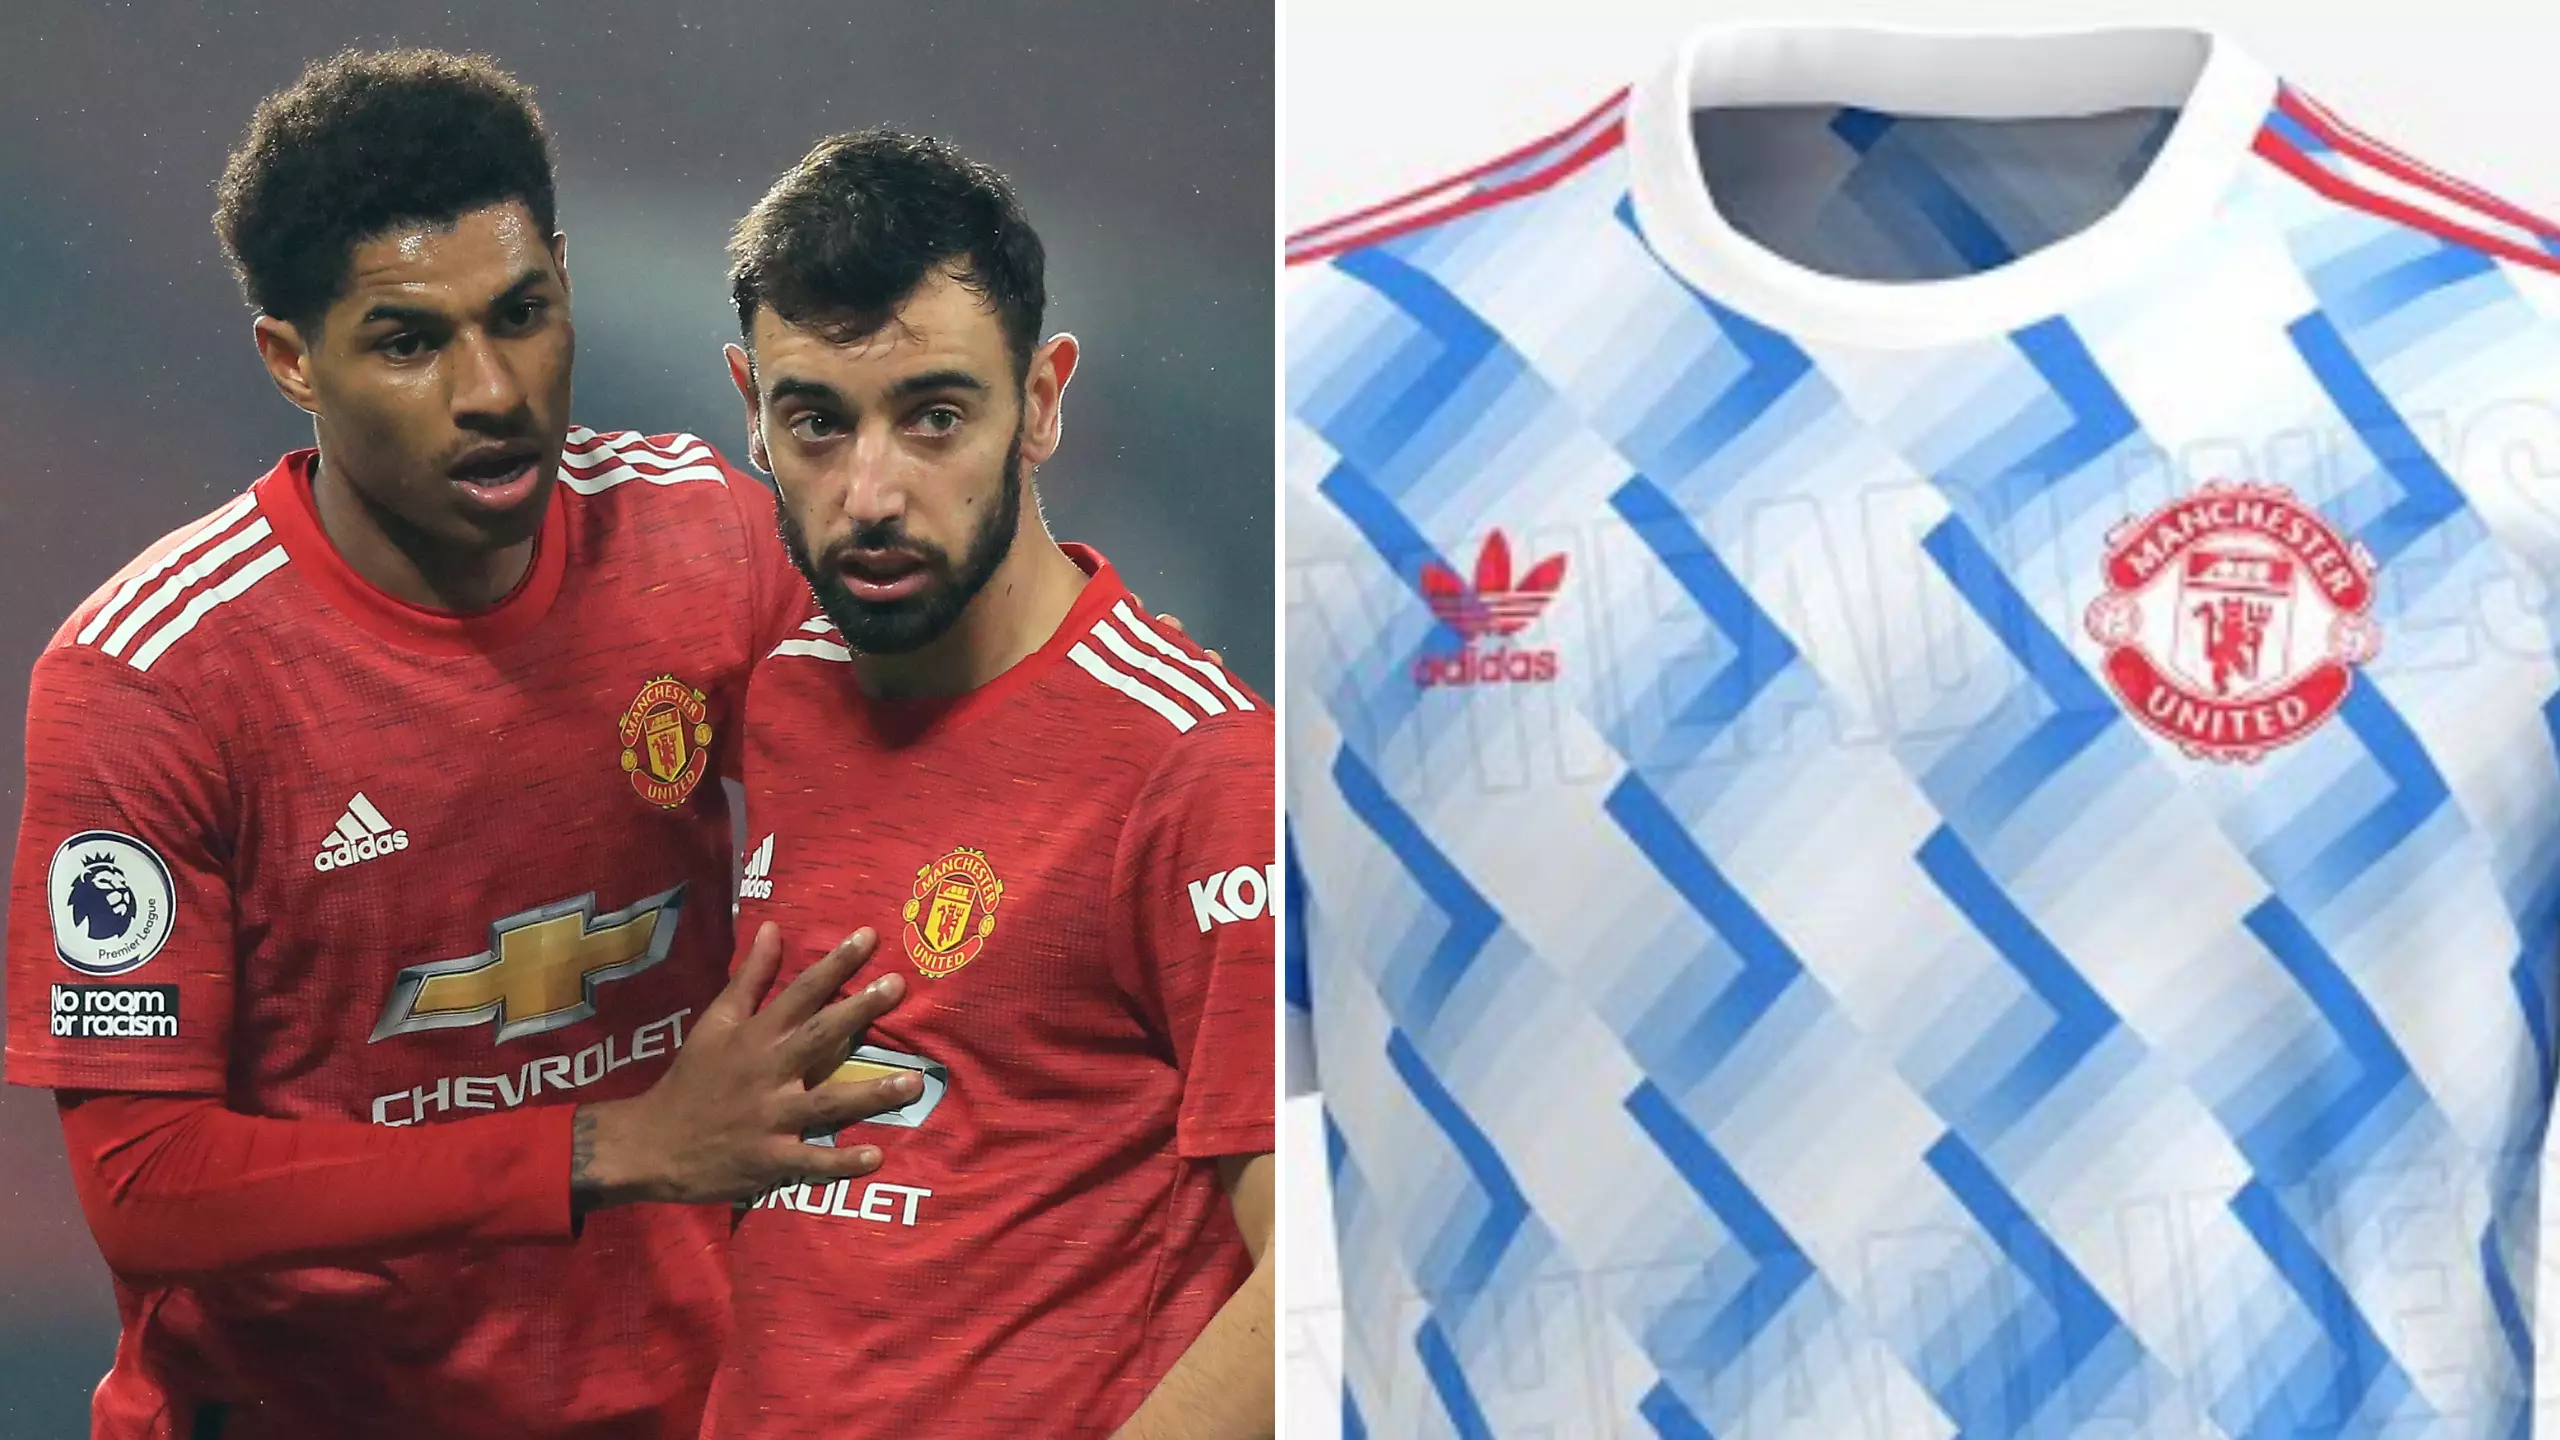 Manchester United's 21-22 Away Kit Has Leaked Online And It's The Greatest 'Retro' Look Ever